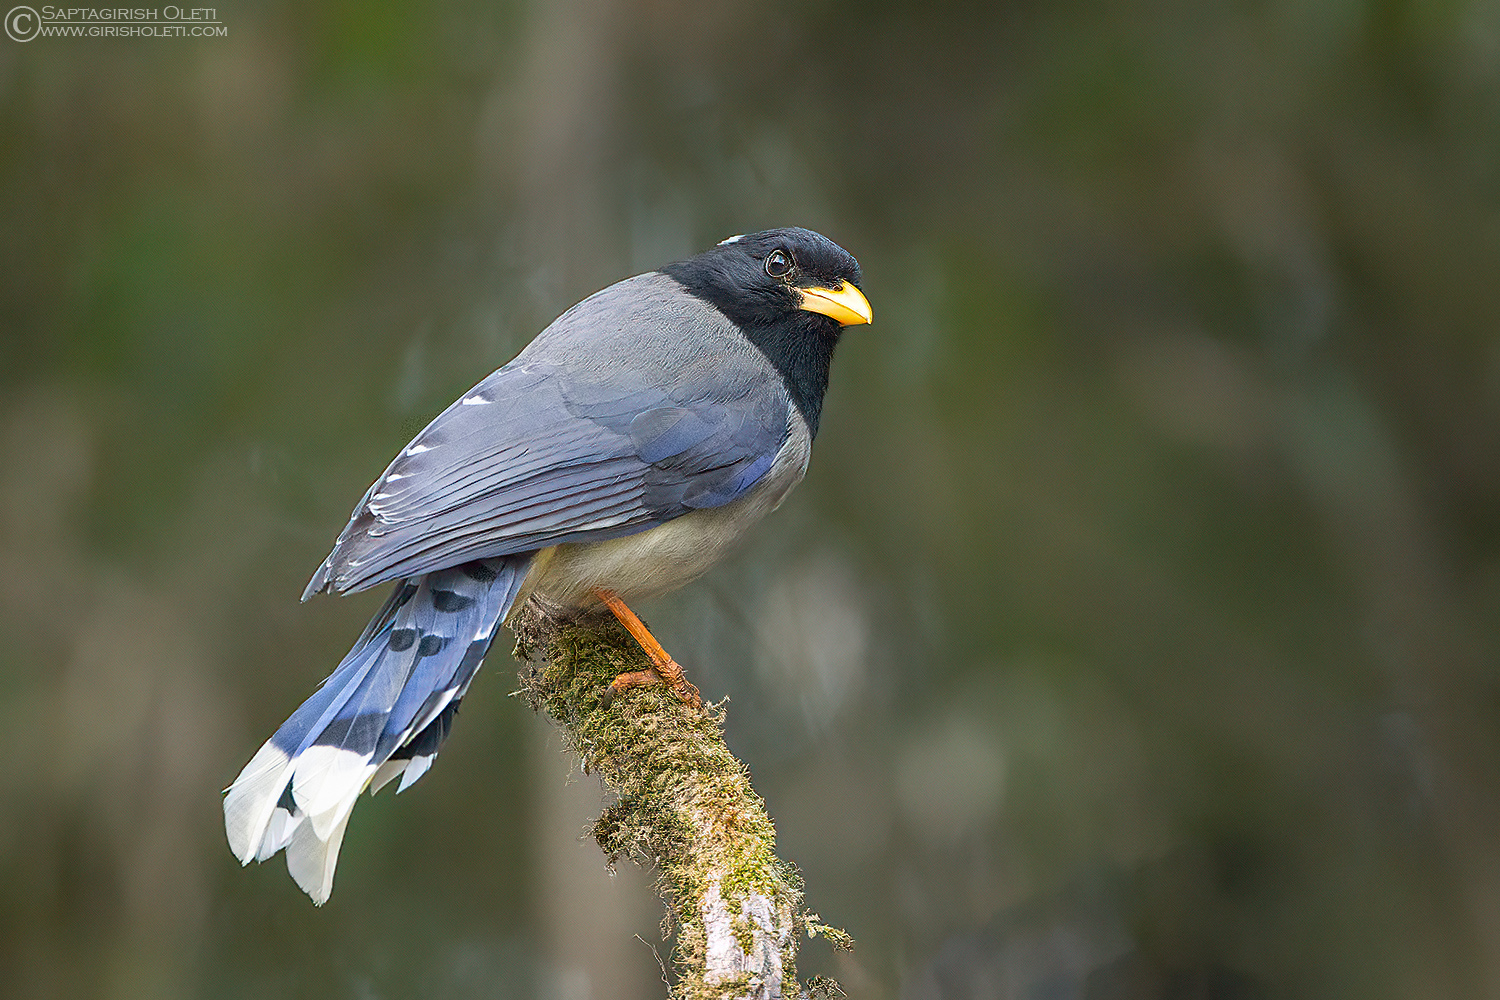 Yellow-billed Blue Magpie photographed at Tiger hills, Darjeeling